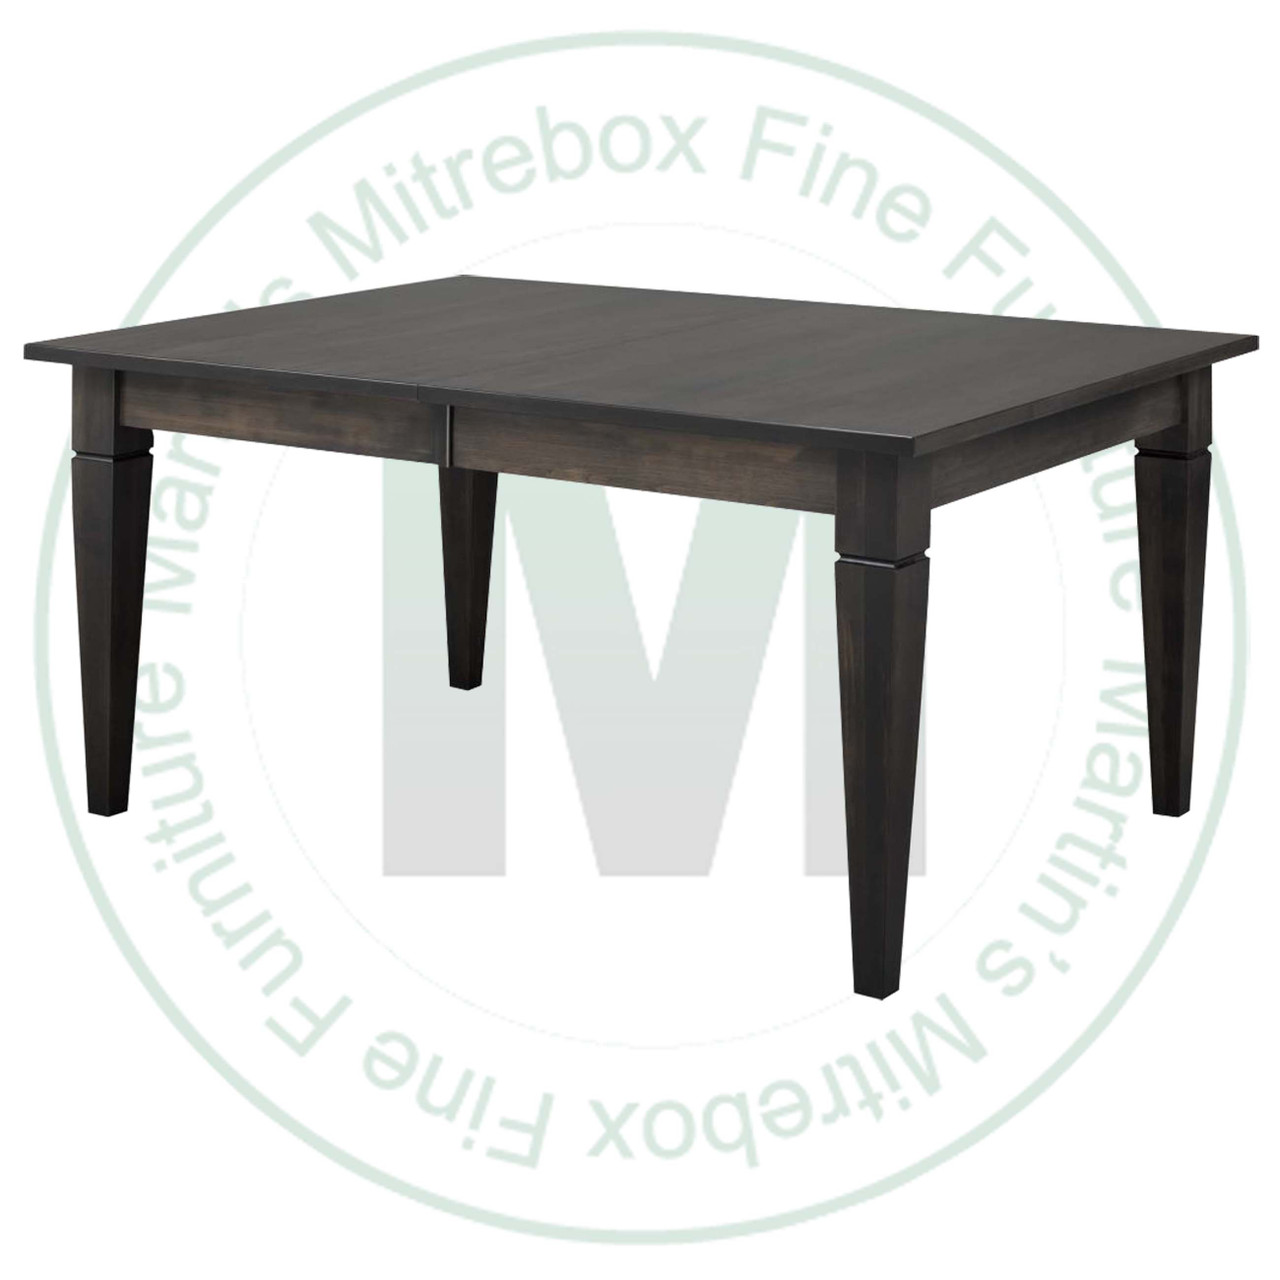 Maple Reesor Solid Top Harvest Table 48''D x 84''W x 30''H Table Has 1.25'' Thick Top And 2 - 16'' Extensions